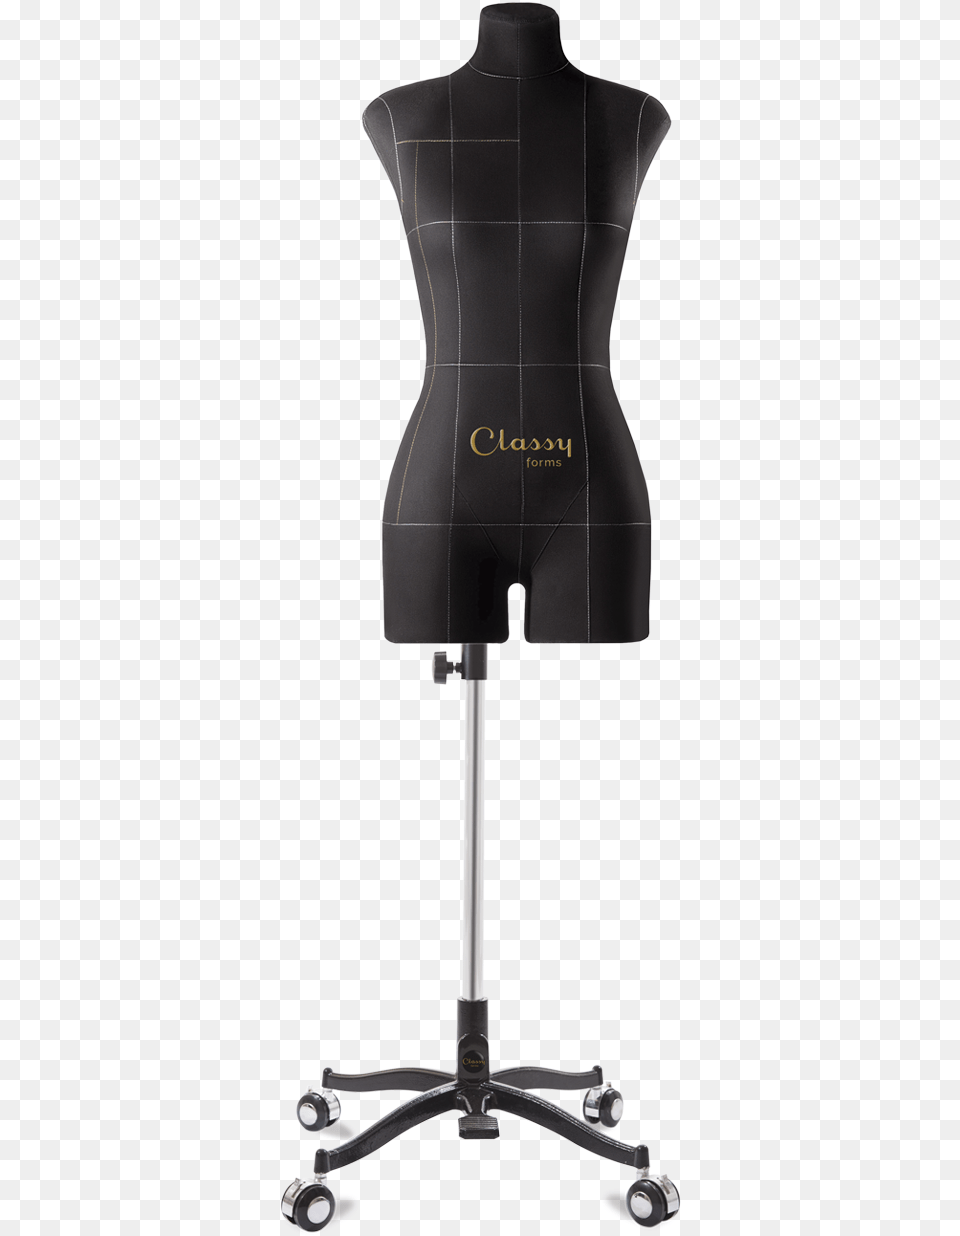 Mannequin Dress Form Clothing Tailor Pin Classy Forms, Vest, Home Decor Free Transparent Png